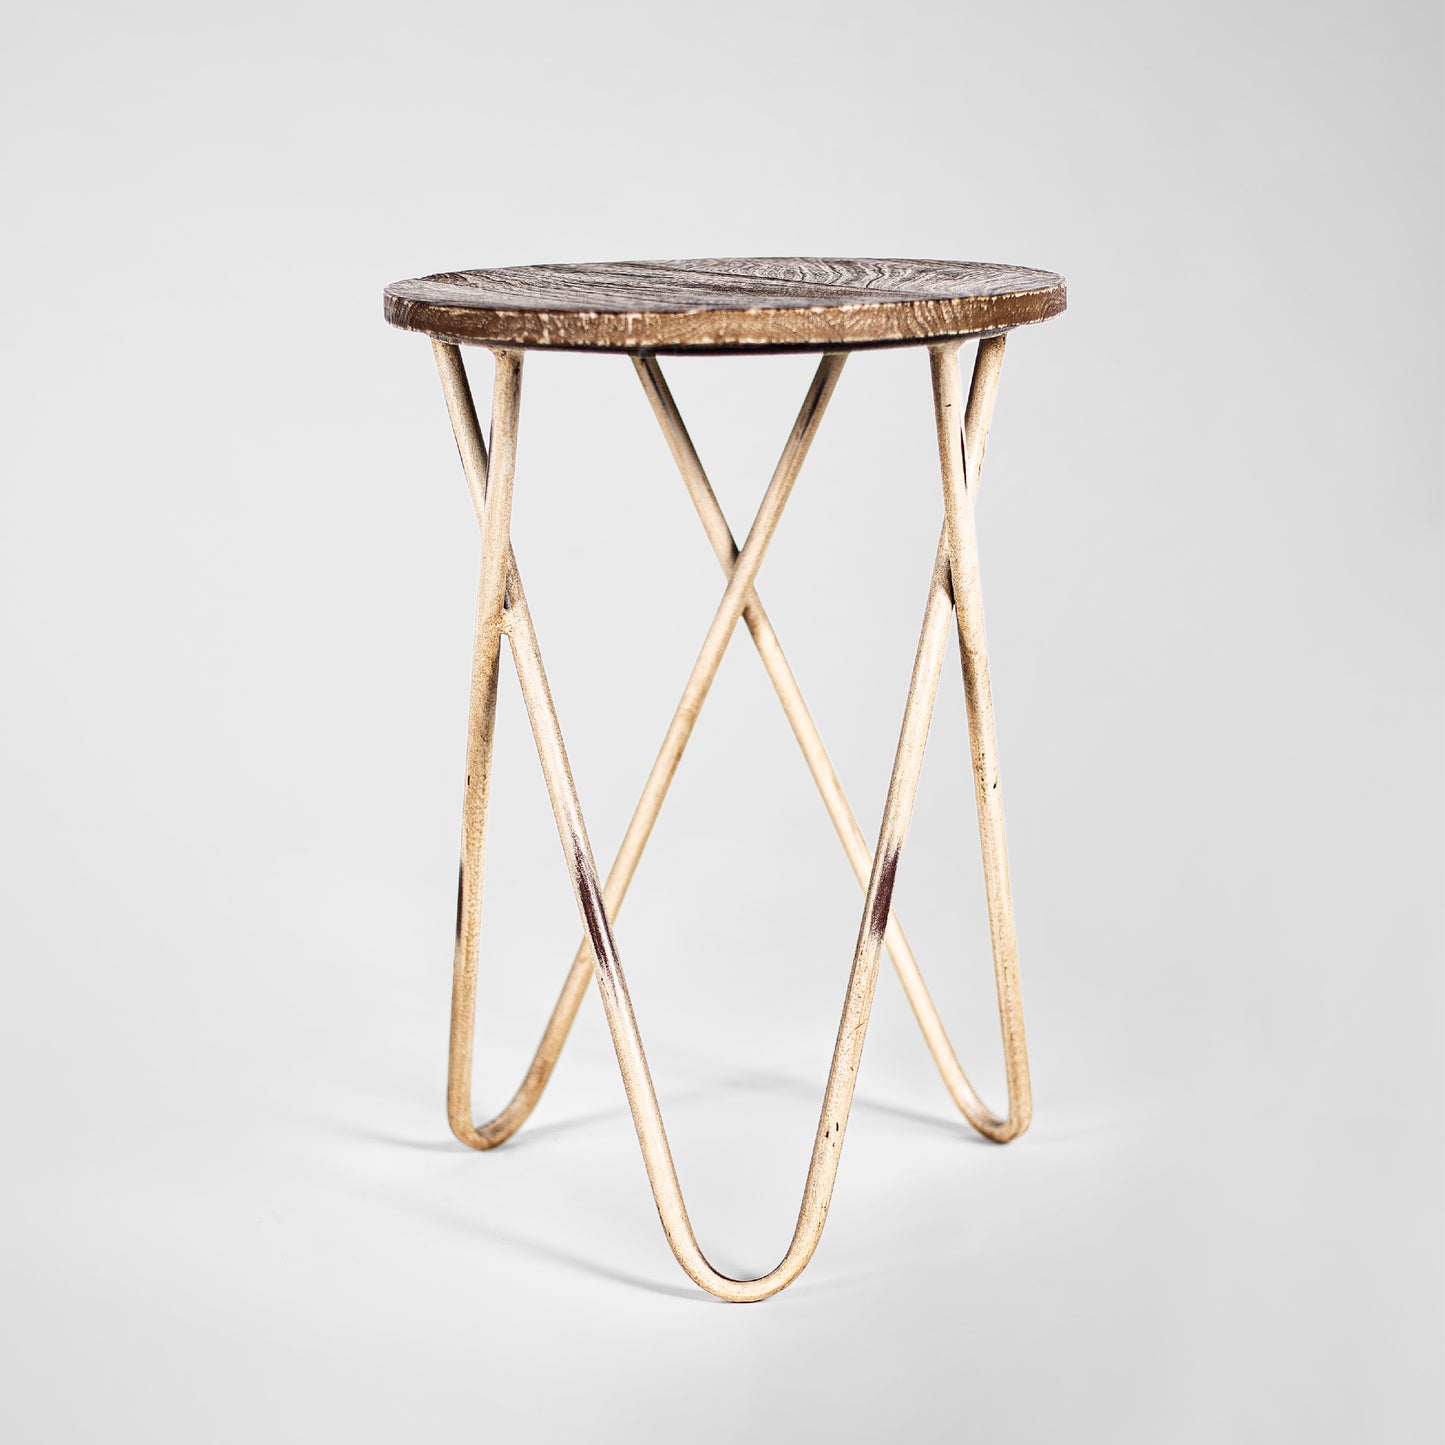 HairPin 104 – Handmade industrial design stool made of metal with wooden seat in black or white